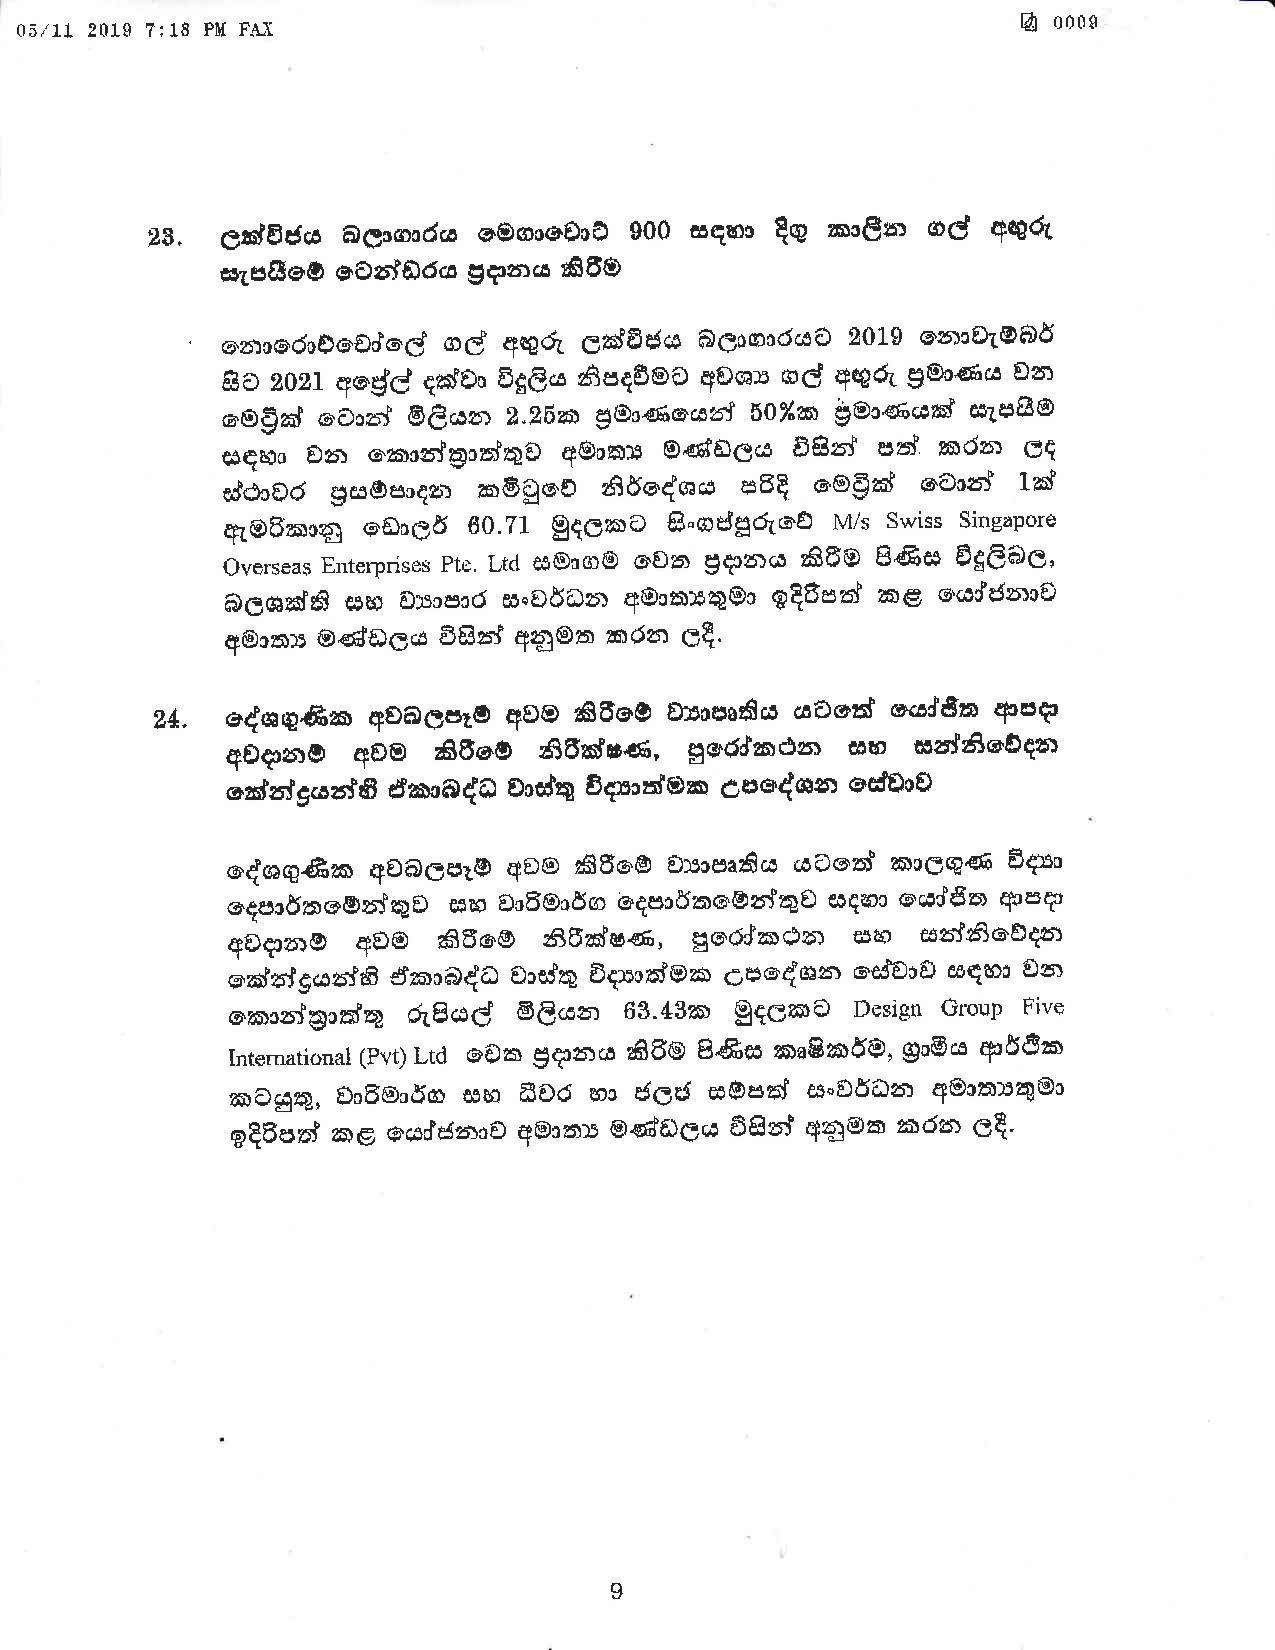 Cabinet Decision on 05.11.2019 page 009